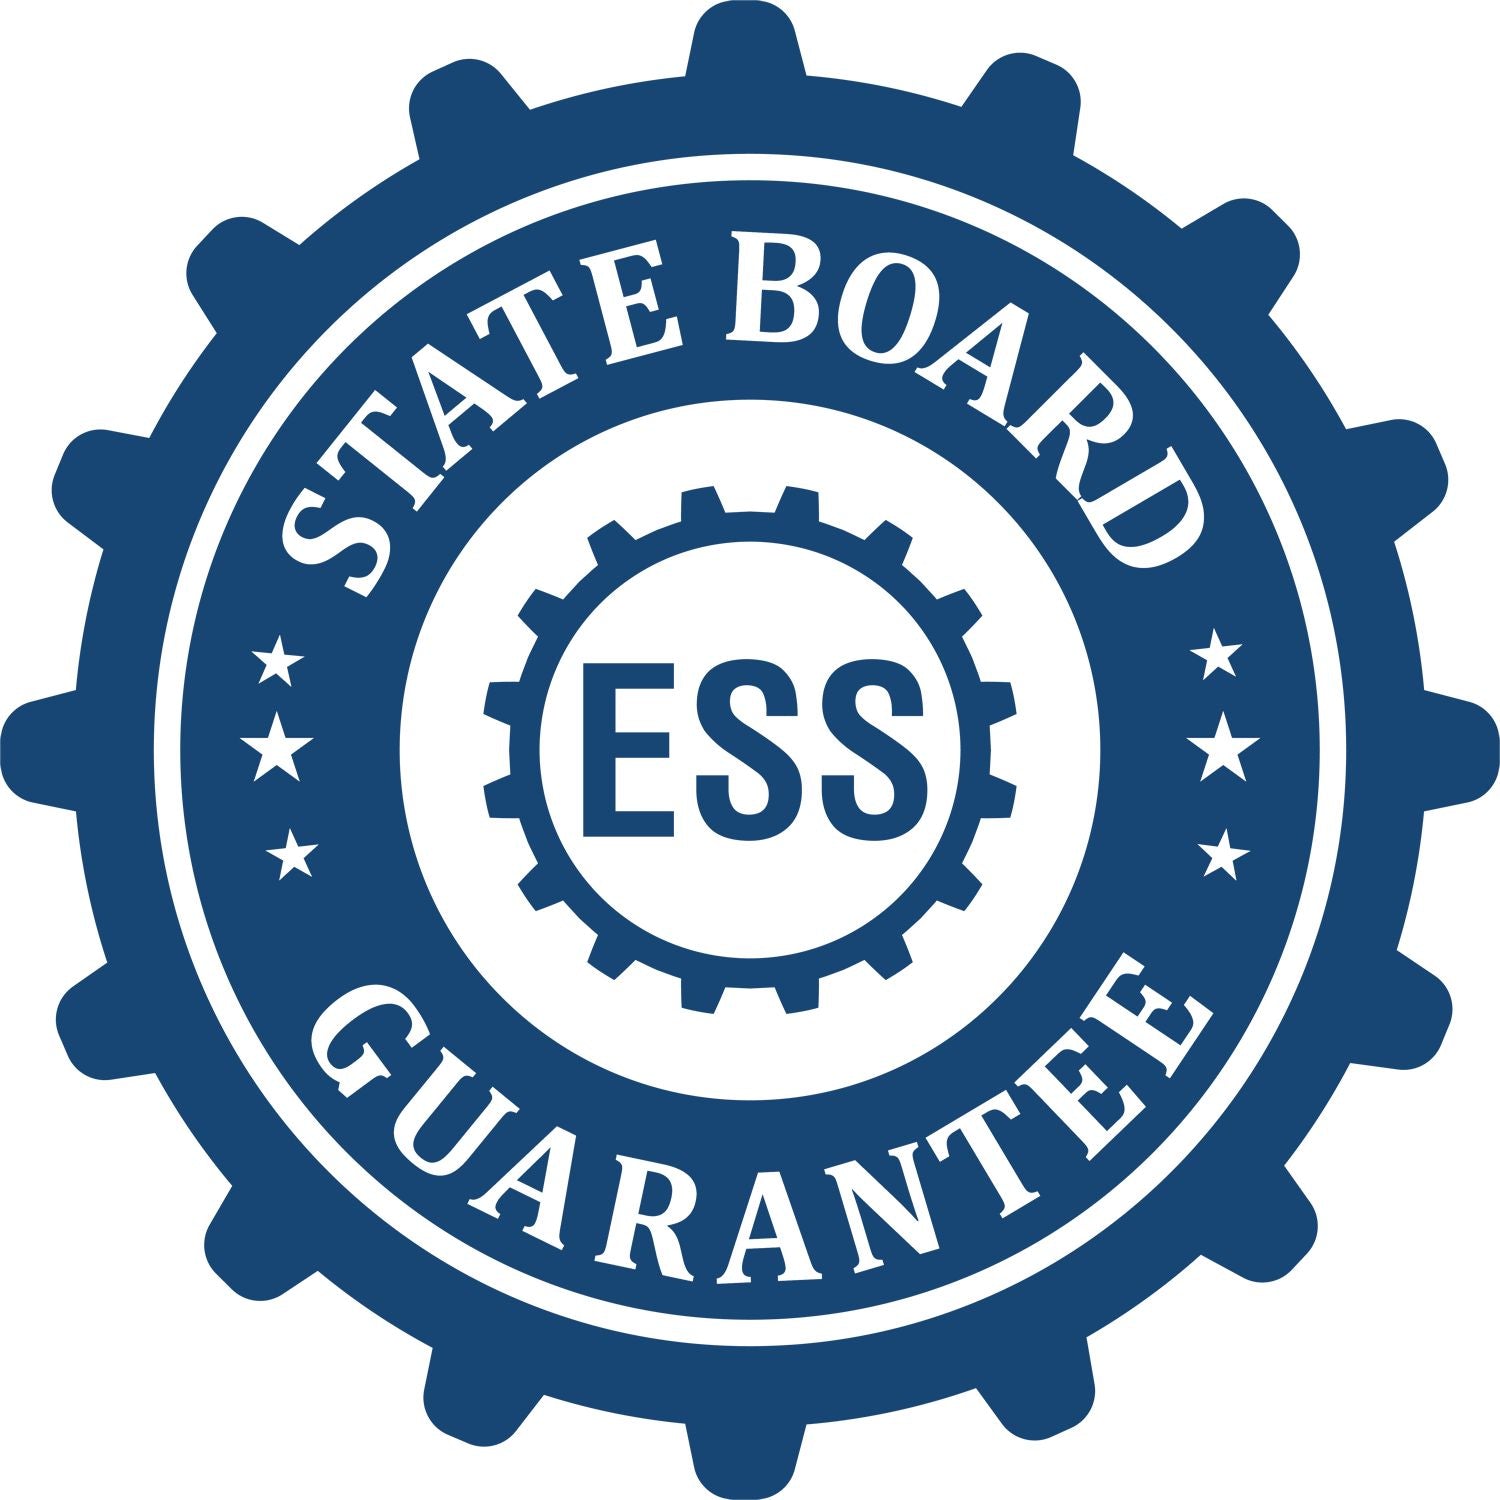 An emblem in a gear shape illustrating a state board guarantee for the Premium MaxLight Pre-Inked Delaware Landscape Architectural Stamp product.